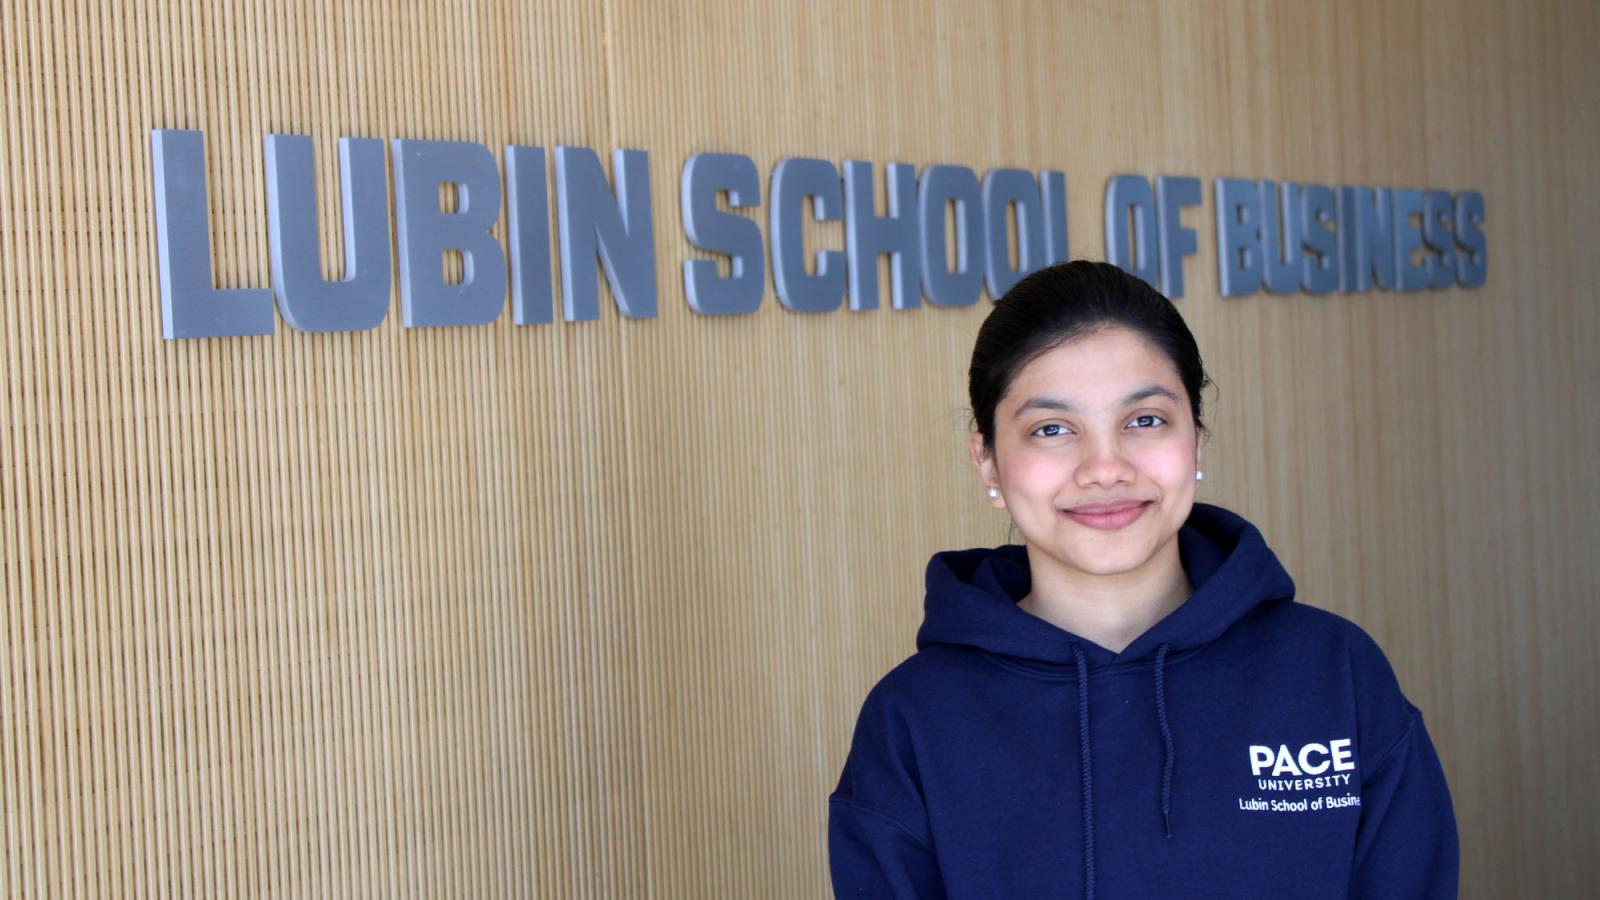 Lubin student Shruti Dhapodkar '23 standing in front of the Lubin School of Business sign on the 4th Floor of One Pace Plaza on the New York City Campus